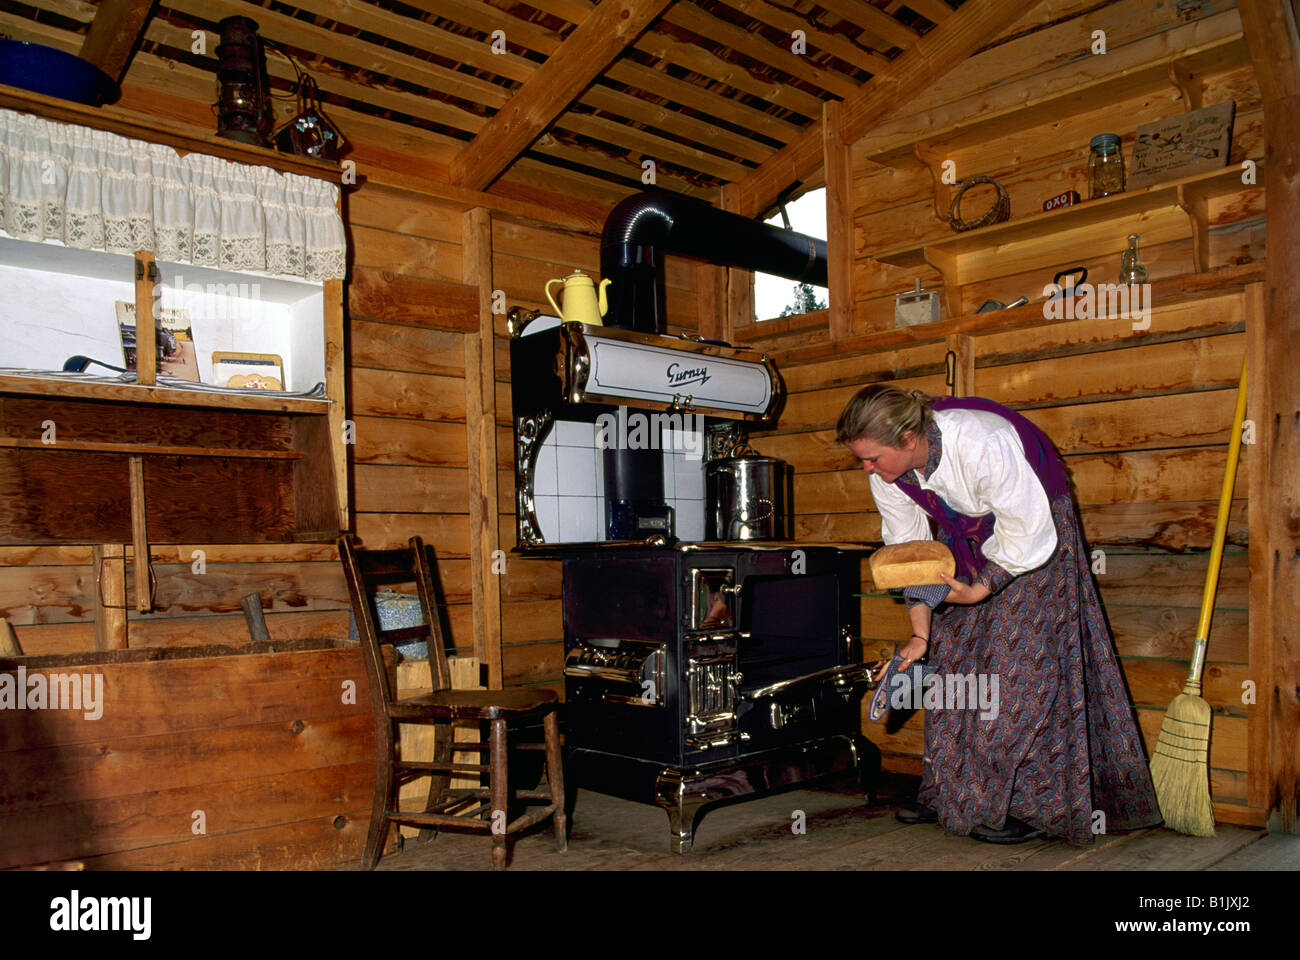 Woman Re-enactor baking Bread in Old Cook Stove Oven at CottonWood House Historic Site near Quesnel, British Columbia, Canada Stock Photo